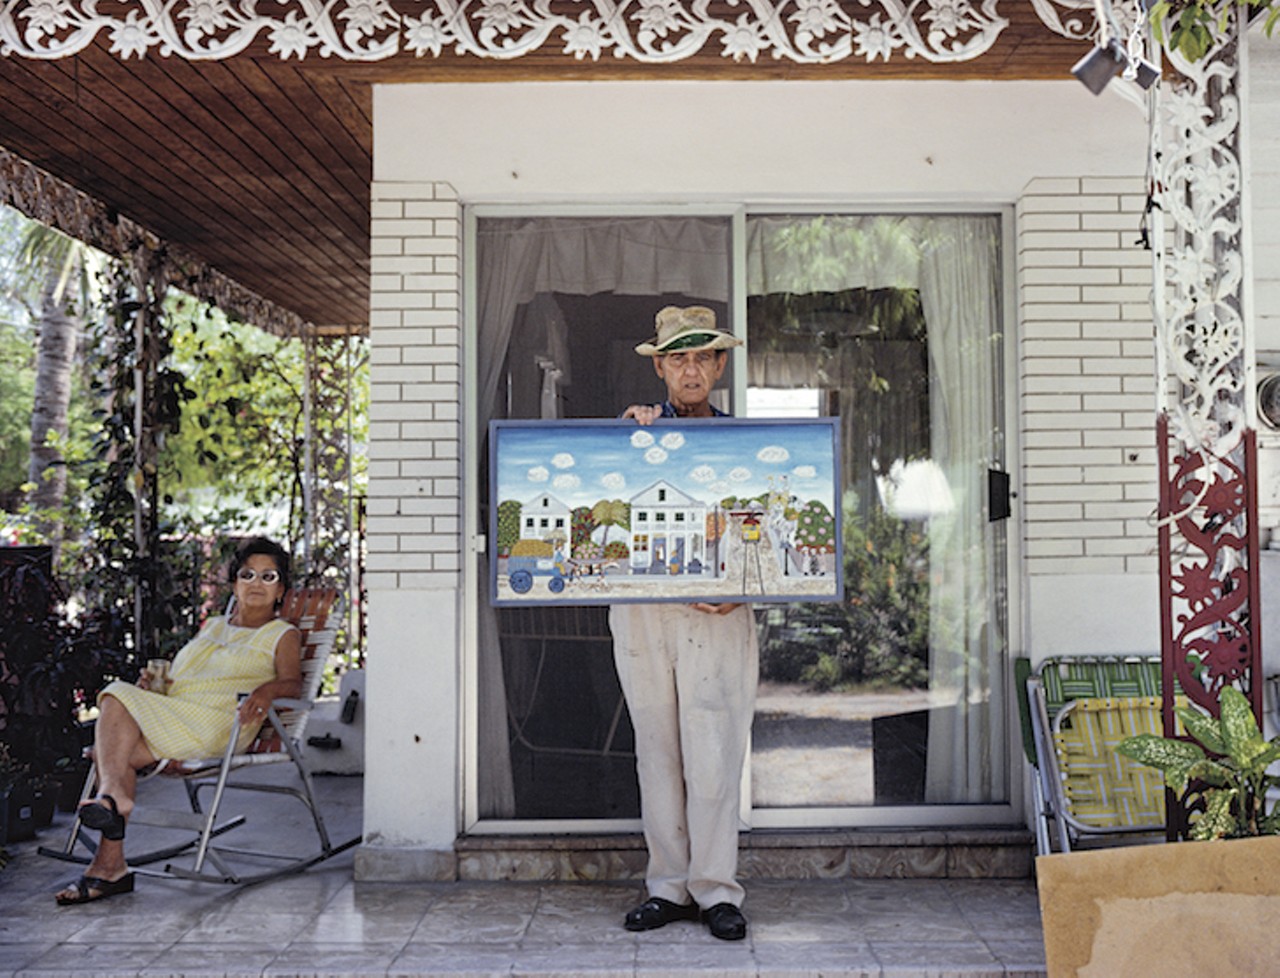 Folk artist proudly displays a recent painting on the veranda of his house in Key West, Florida. The painting depicts an idealized view of old Key West or Havana. Folk Art is also caller Outsider Art. His wife relaxes nearby. The man was born in Cuba. 1981.